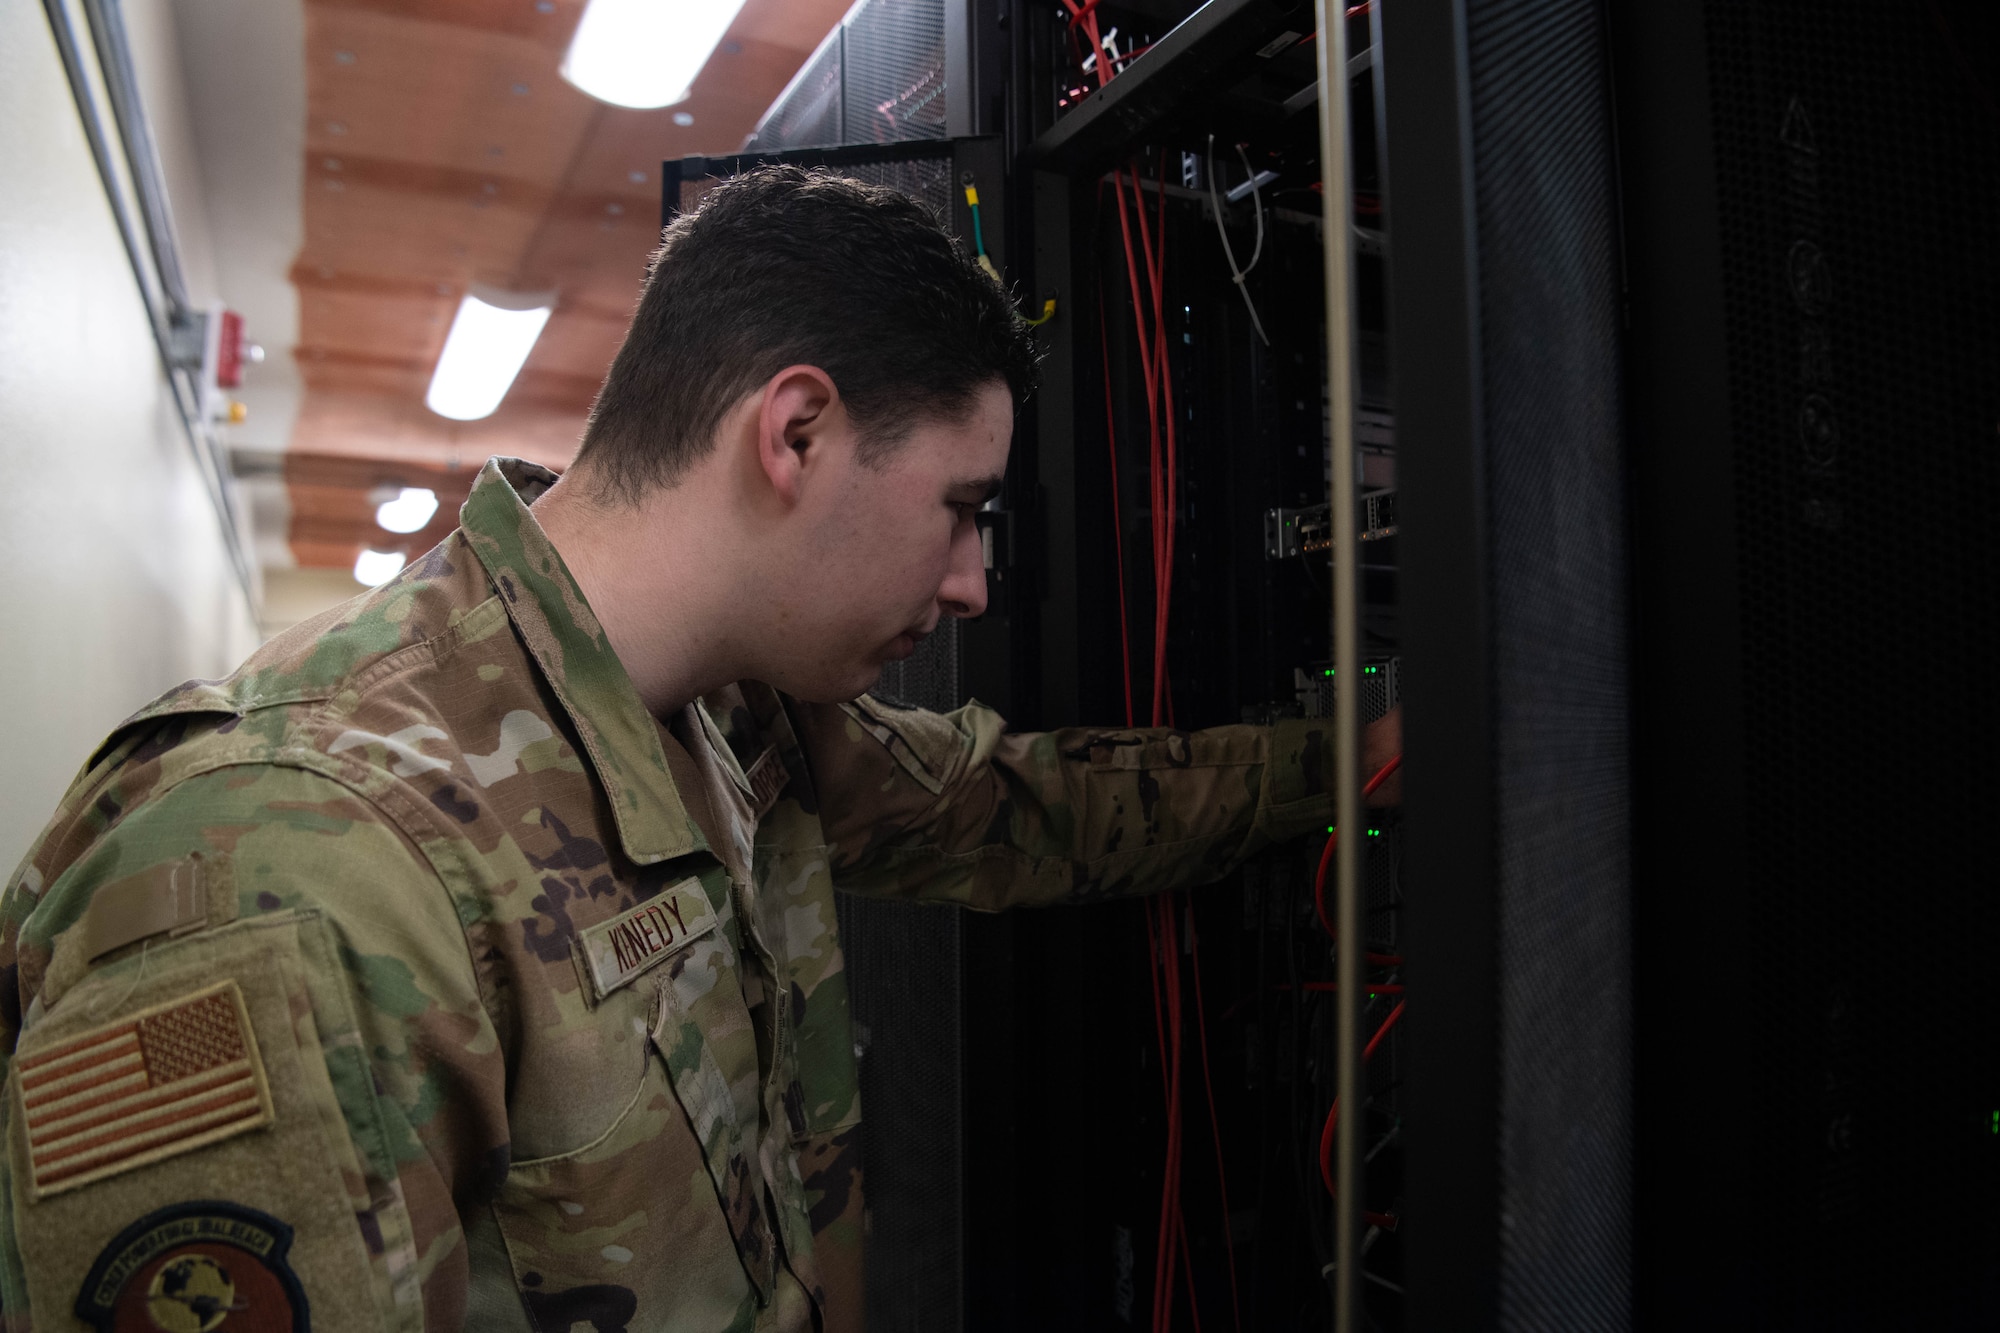 3.	Senior Airman Nathan Kennedy, 608th Air Communications Squadron system administrator, inspects servers in the 608th ACOMS data center. An important part of his job is to ensure all systems are on and running 24/7 with the most current upgrades.  (U.S. Air Force photo by Staff Sgt. Bria Hughes)